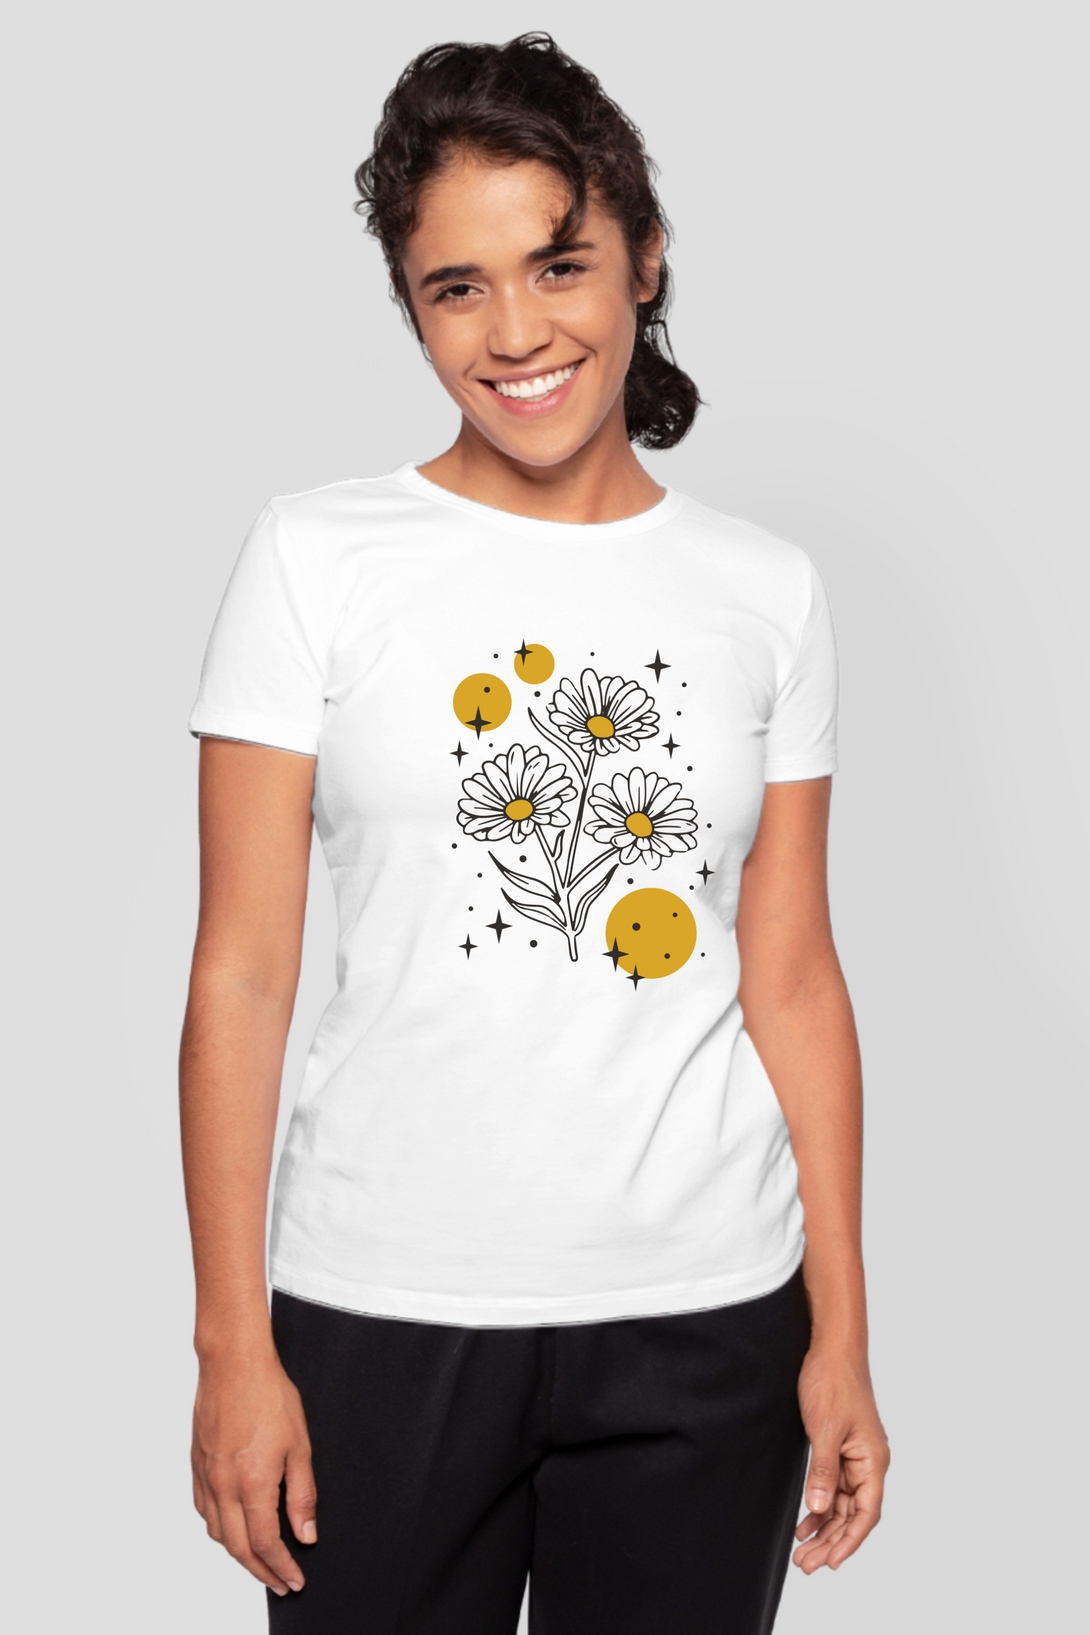 Sparkling Flowers Printed T-Shirt For Women - WowWaves - 8